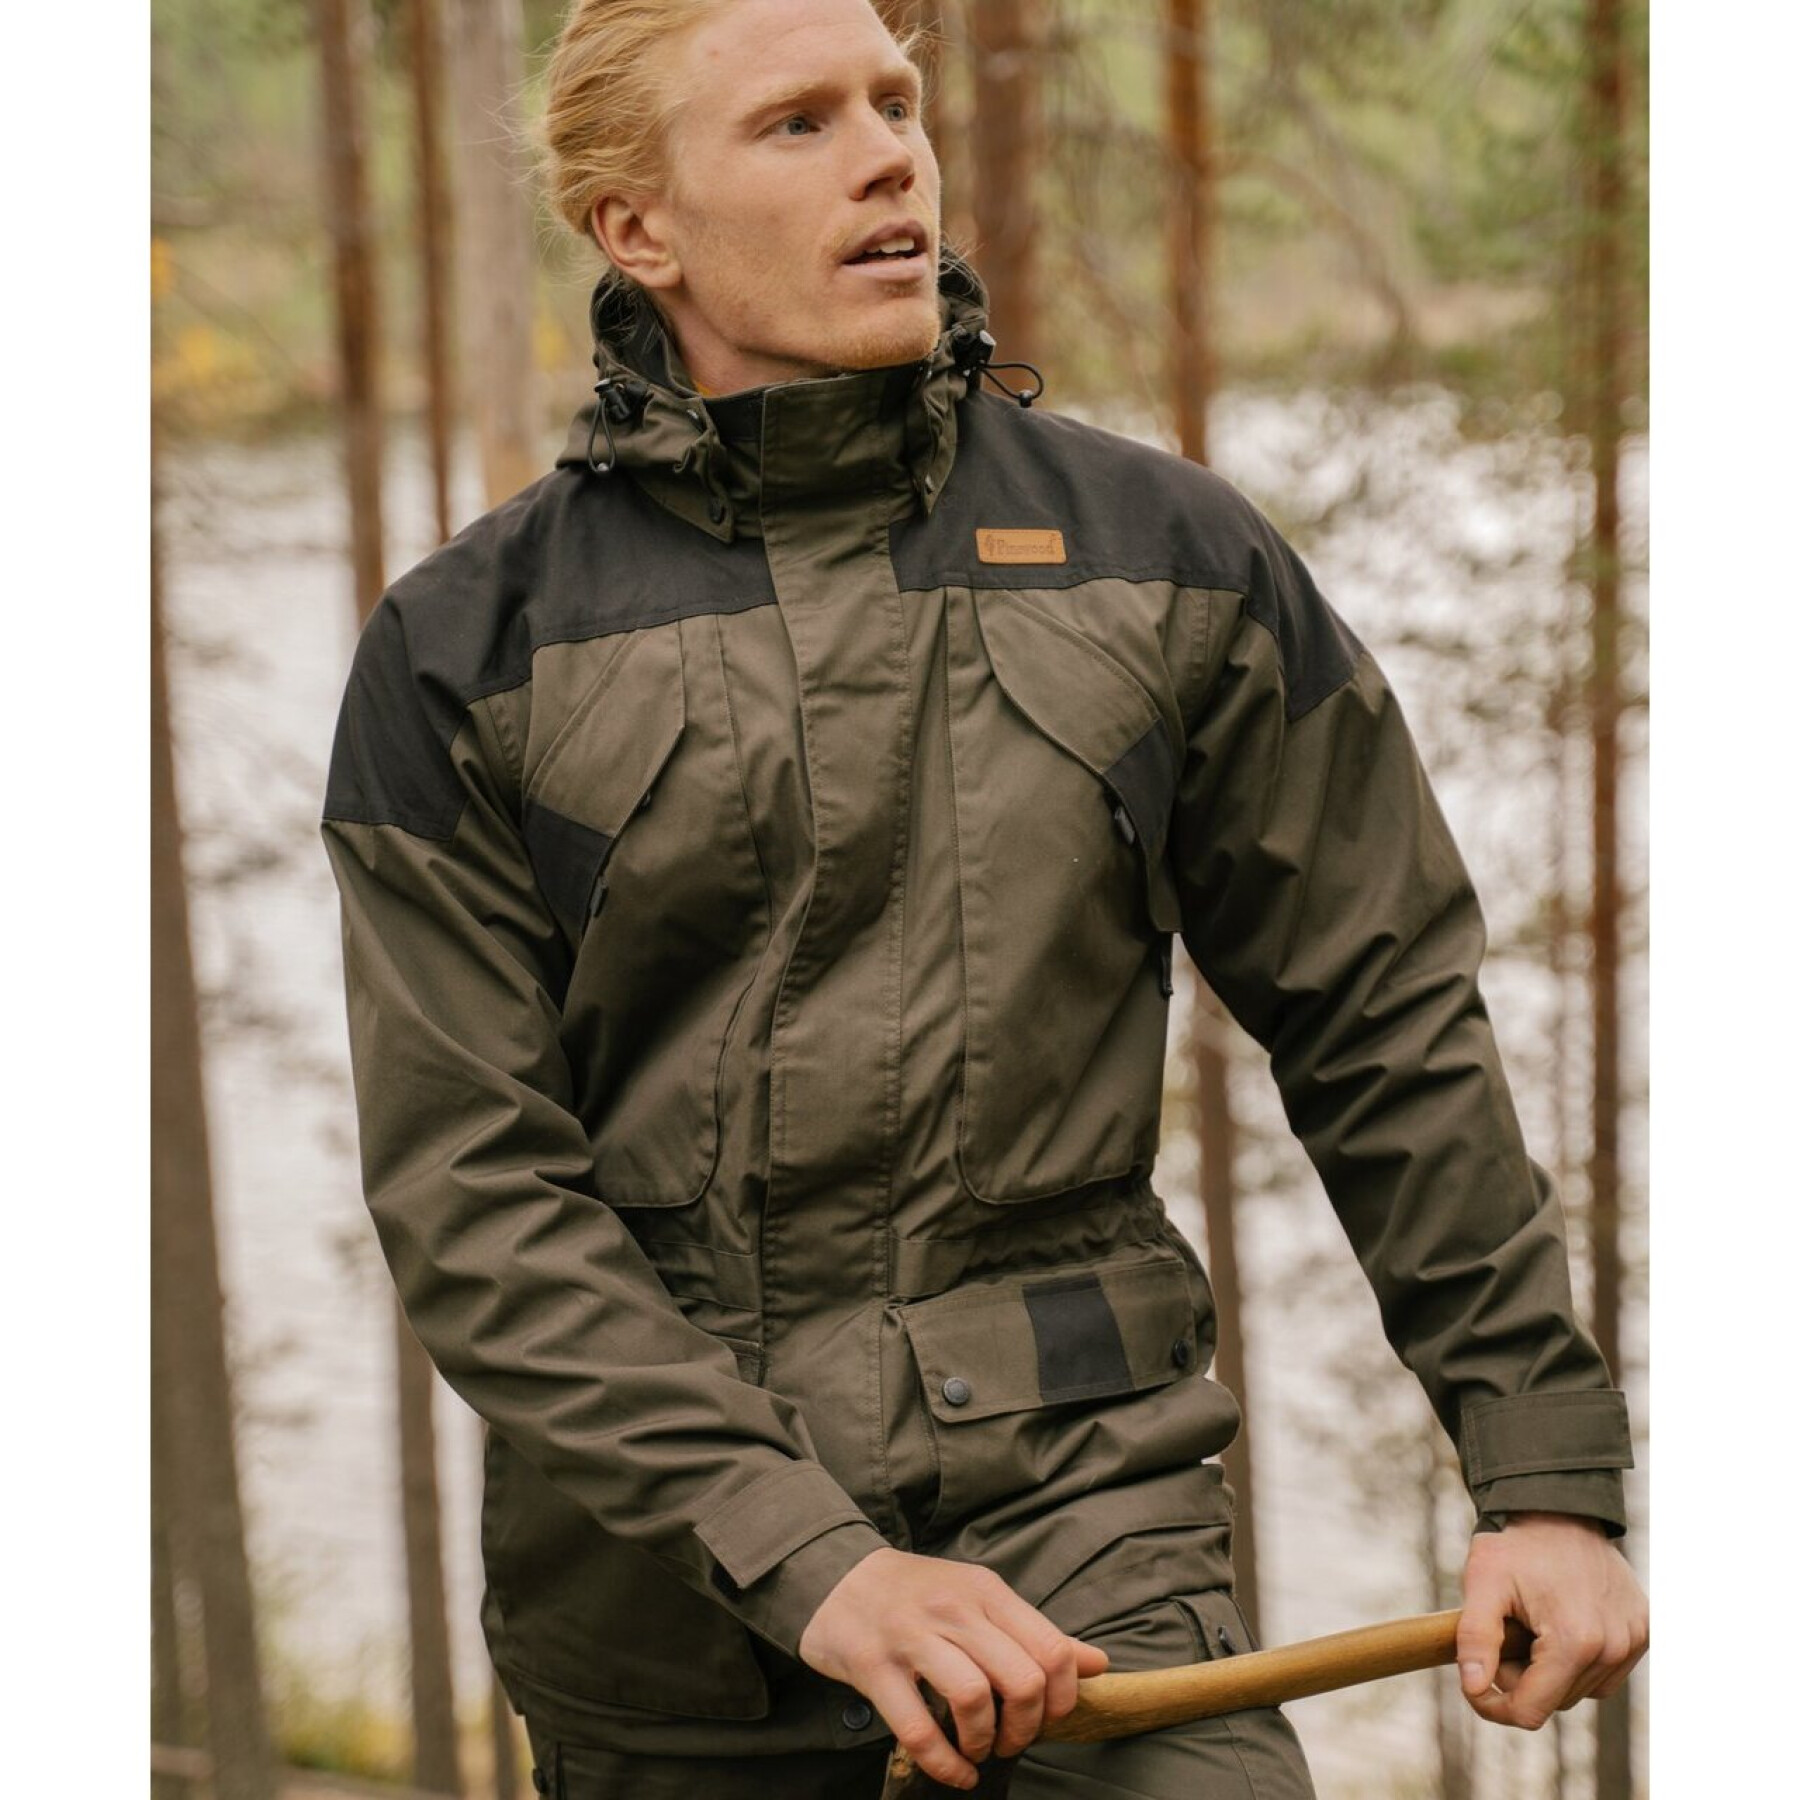 Chaqueta impermeable Pinewood Lappland Extreme 2.0